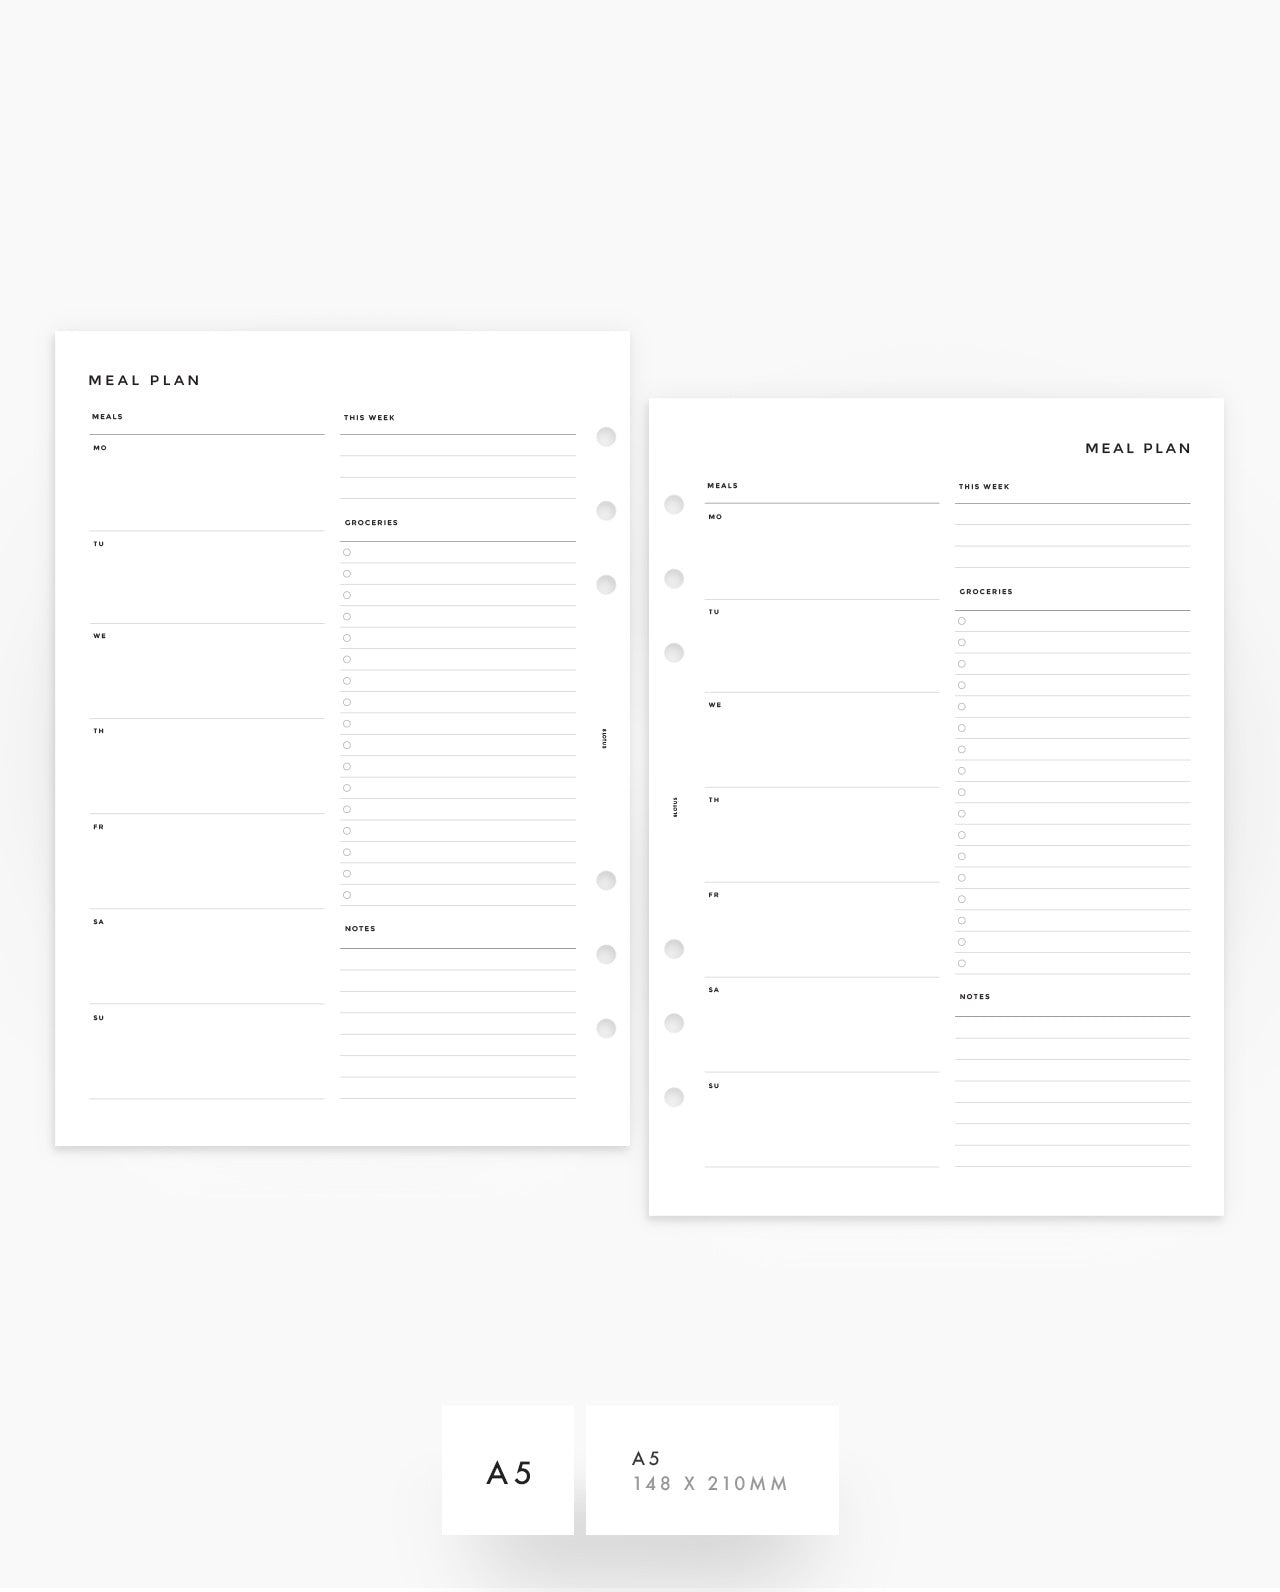 MN099 - Meal Planner - WO1P - PDF